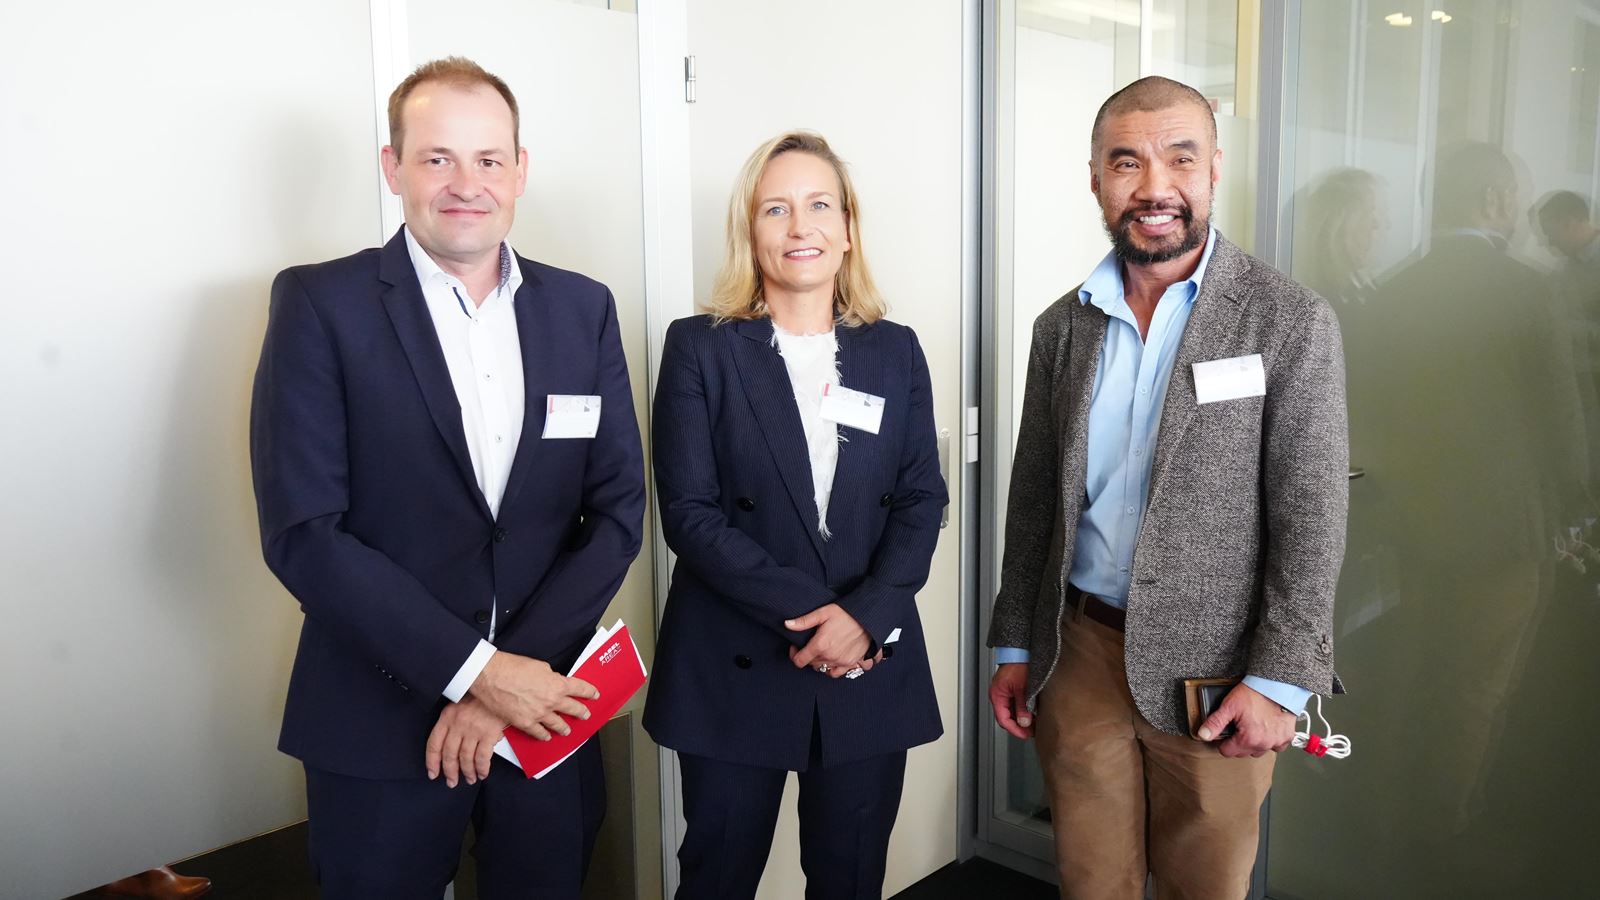 F.l.t.r: Christof Klöpper, CEO, Basel Area Business & Innovation, Emmanuelle Lecomte-Brisset, CSL Head of Global Regulatory Affairs and Eric Teo, CSL Head of Patient Safety, at the CSL office opening on the premises of Switzerland Innovation Park Basel Area